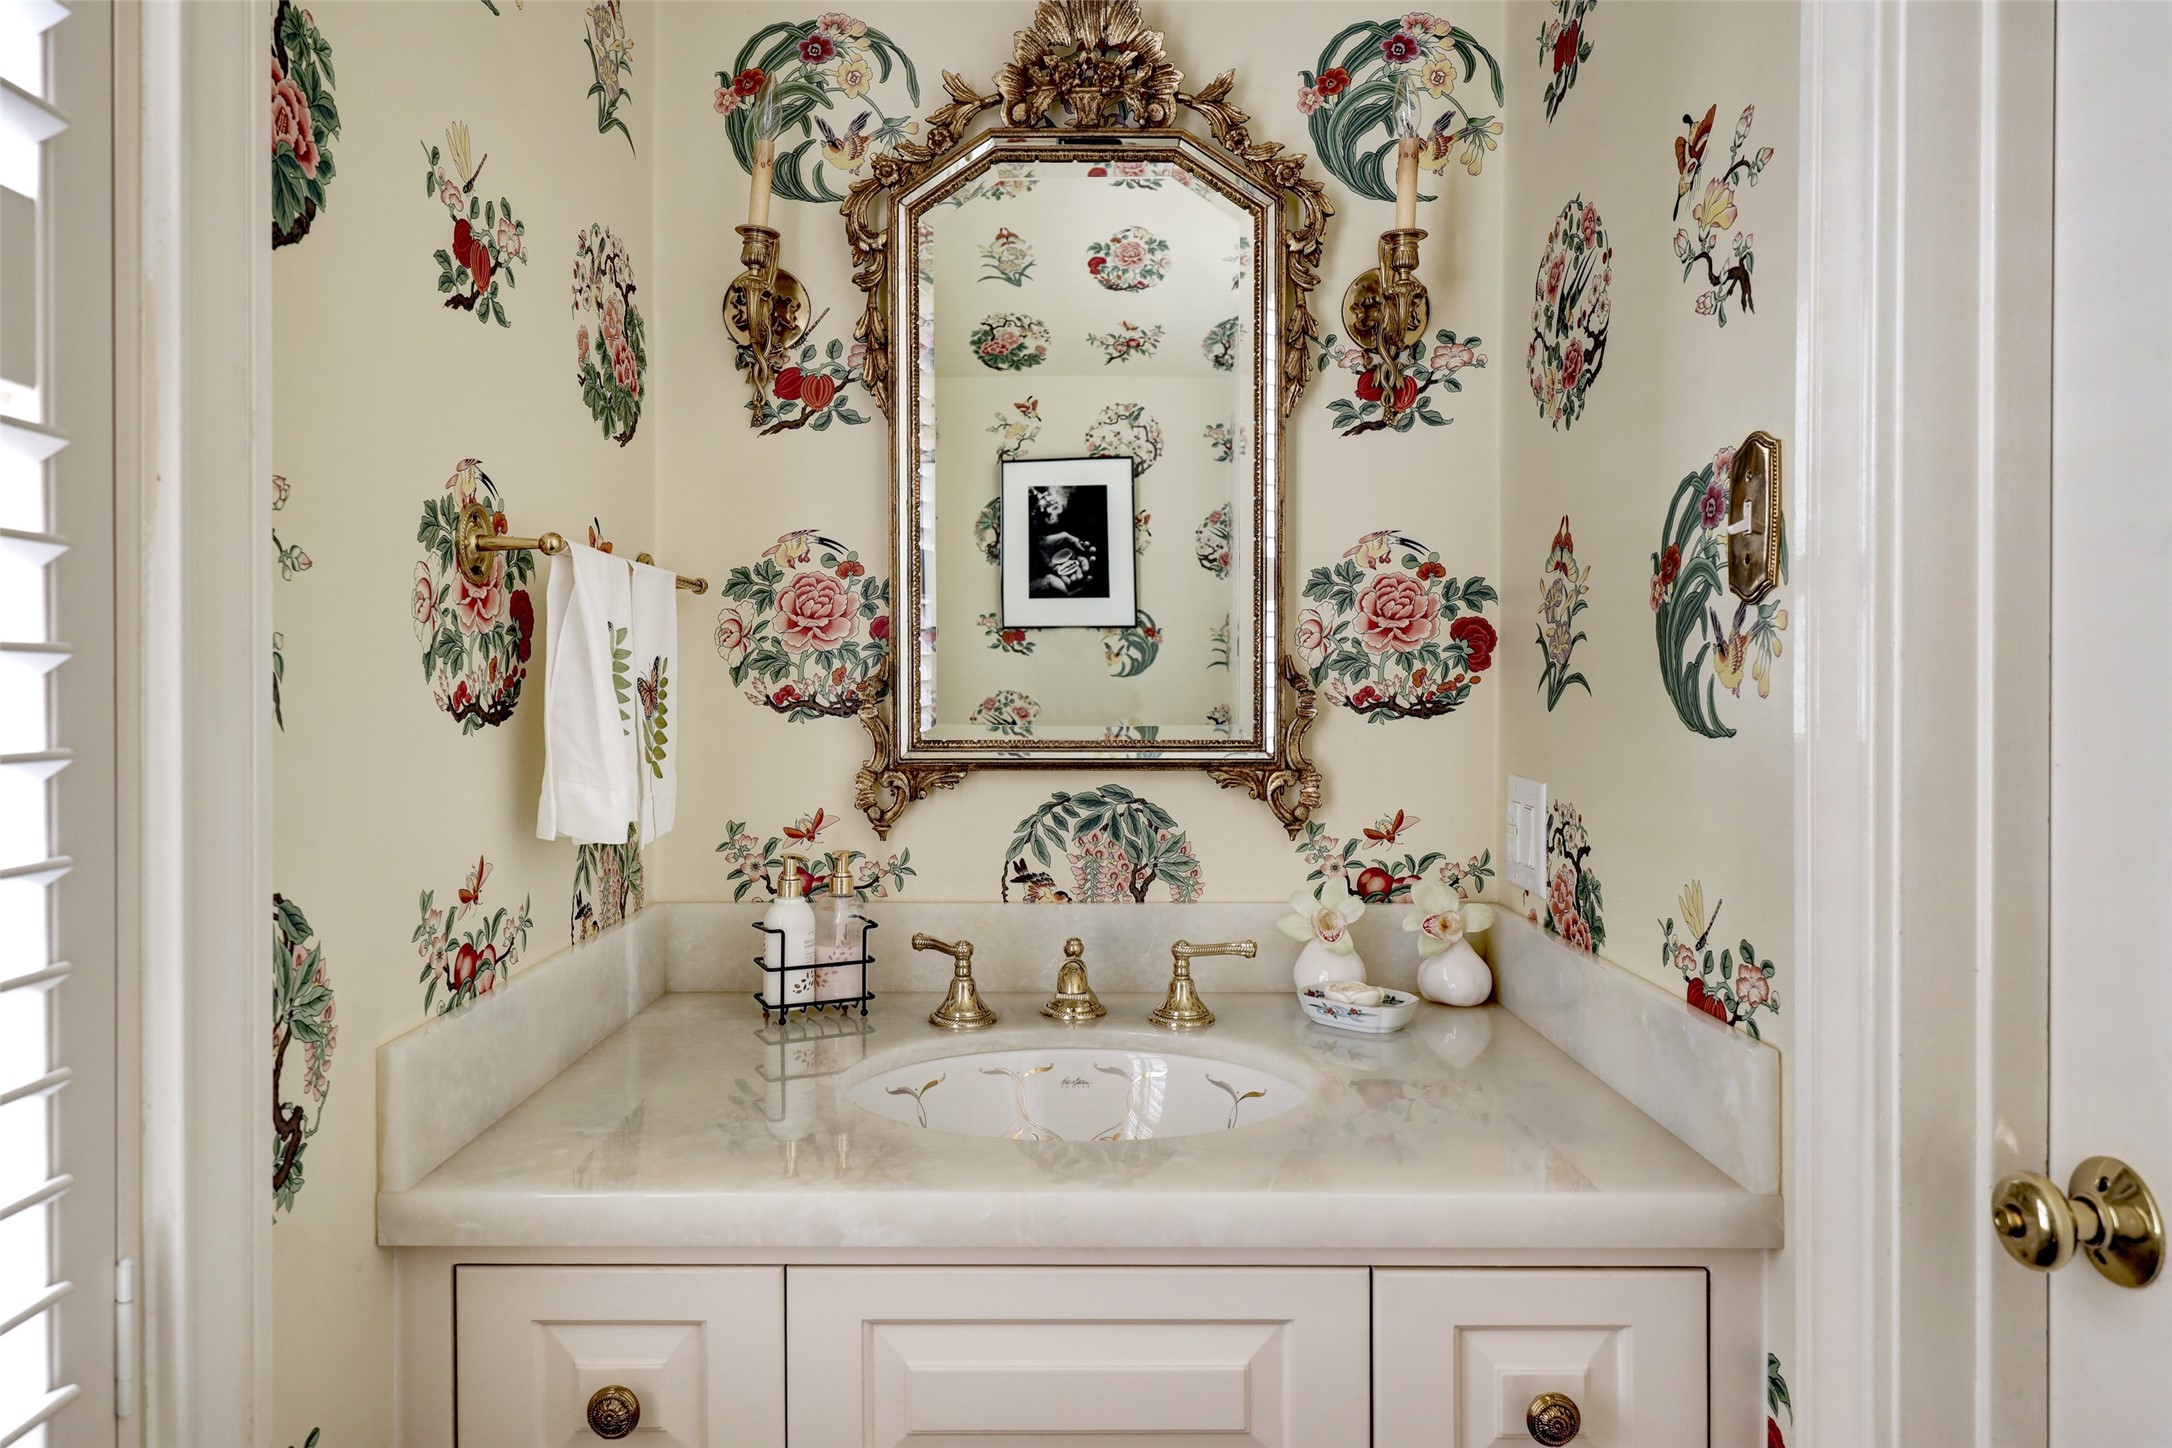 An elegantly appointed downstairs powder bathroom echoes the luxury of the adjoining spaces.